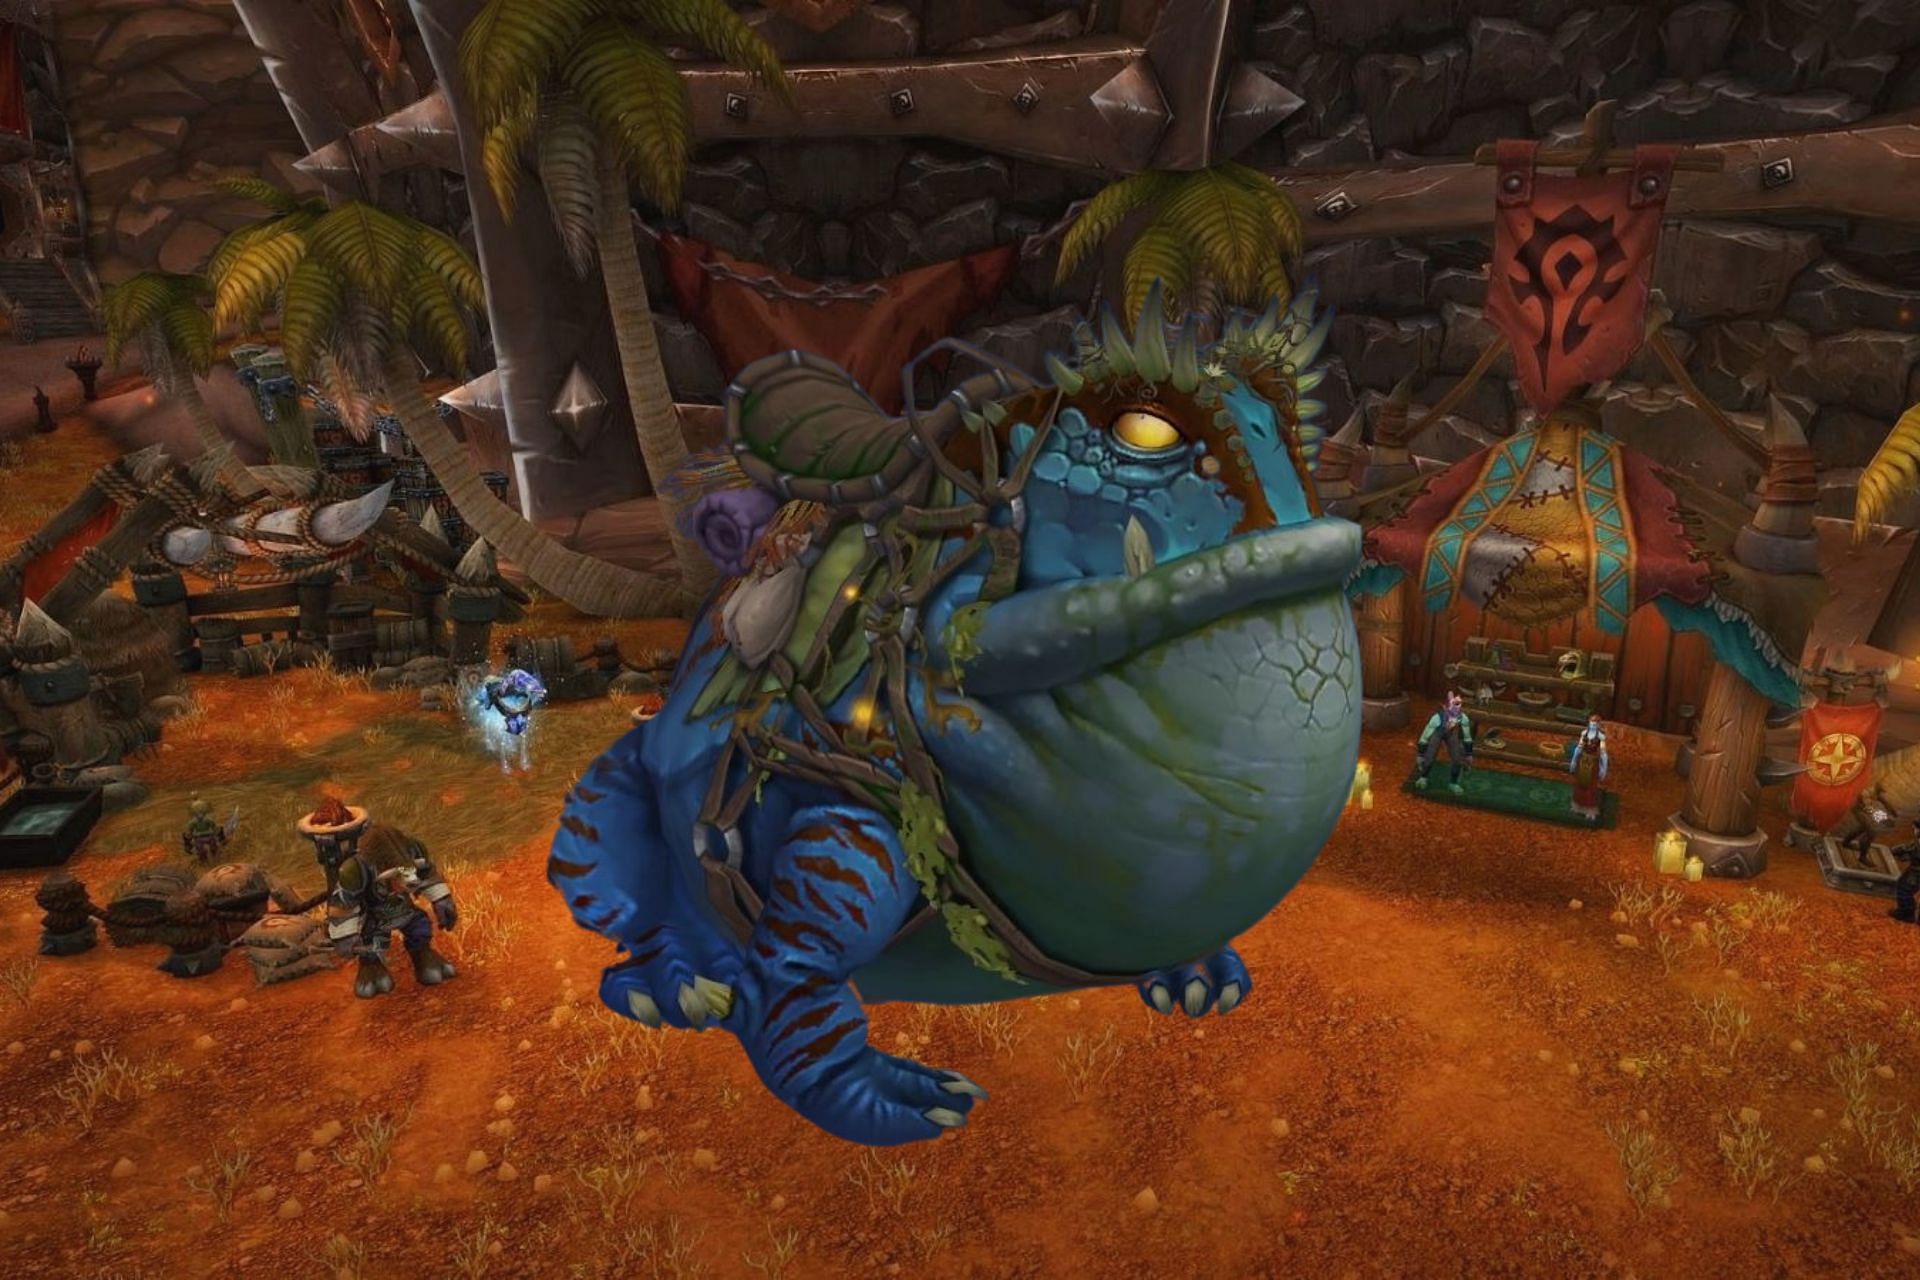 World of Warcraft is getting a new version of a classic mount, according to dataminers.